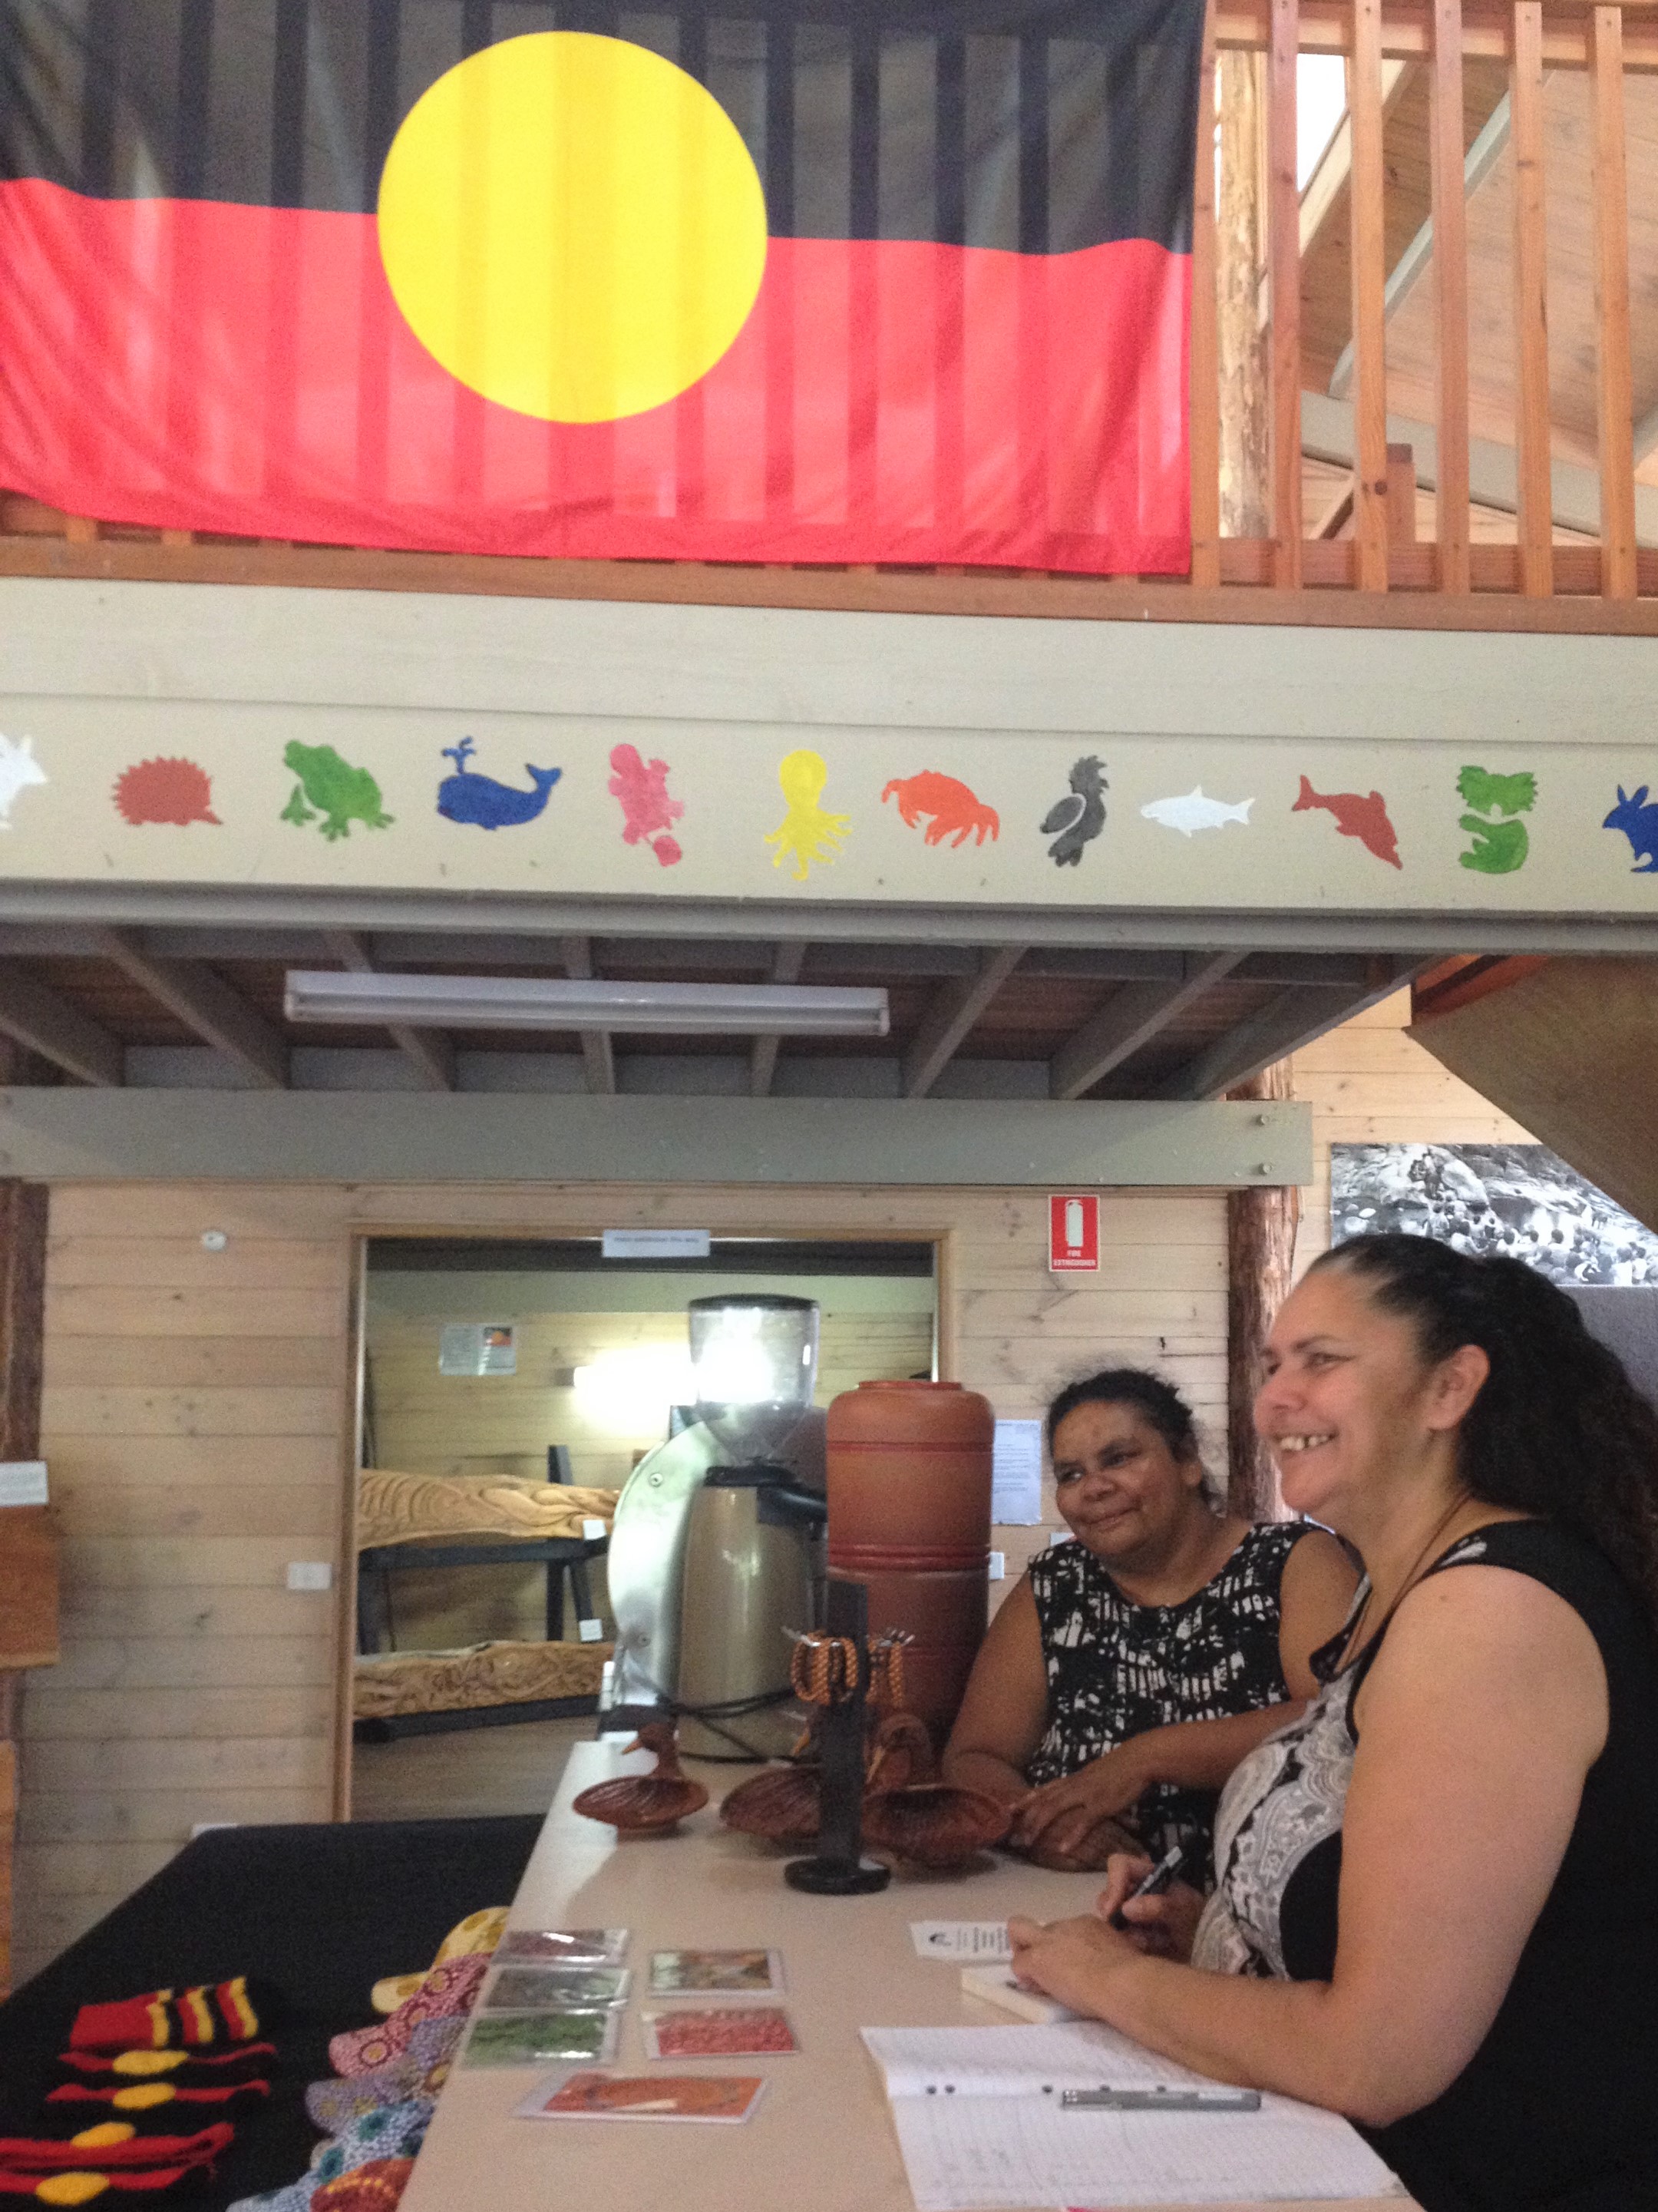 Walker sisters plan to revitalise their community: Umbarra Cultural Center re-opens